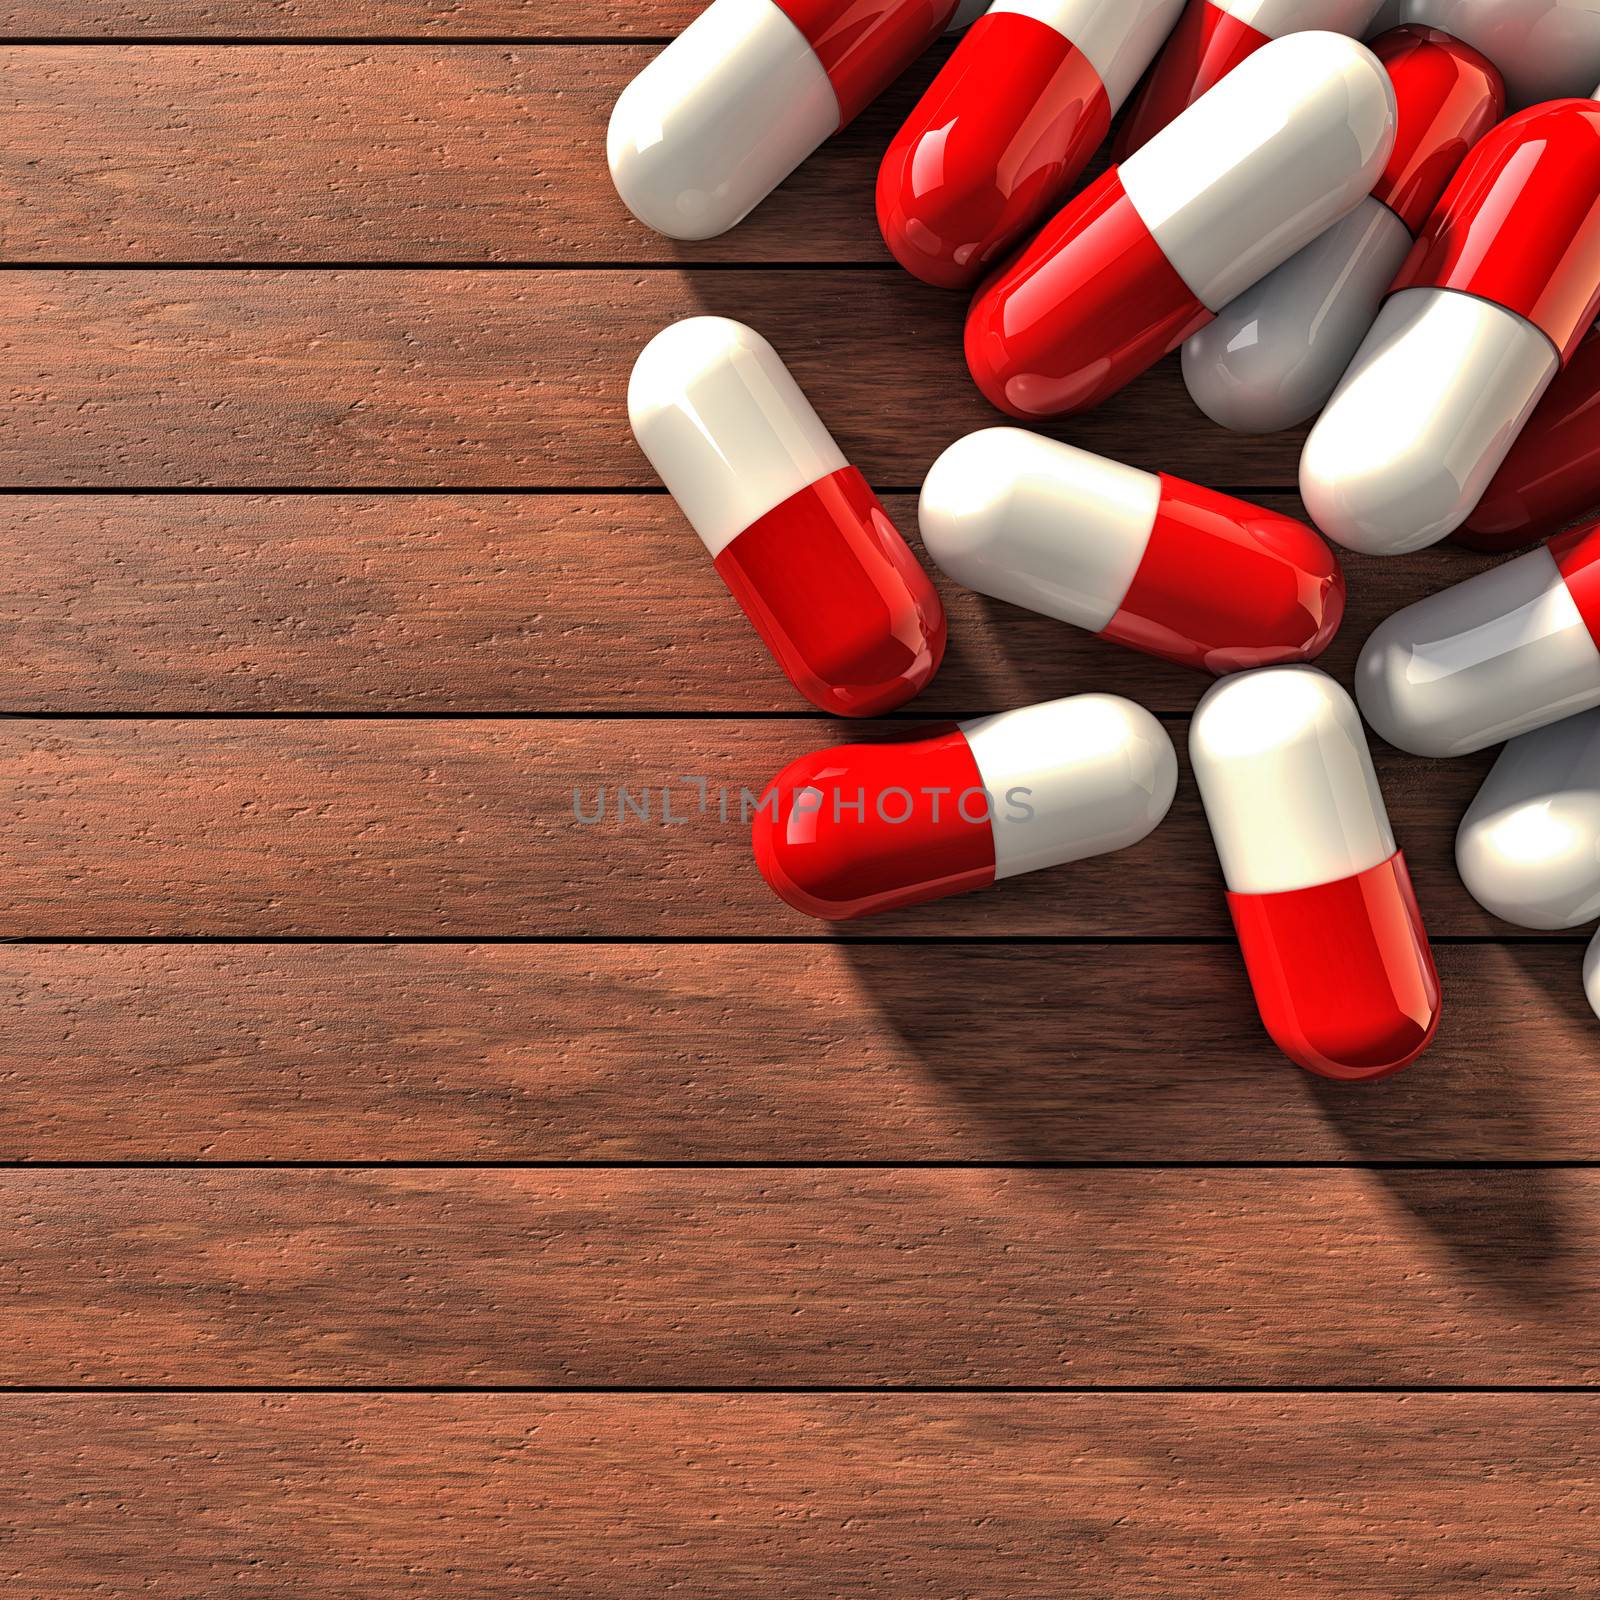 Pills on table by dynamicfoto